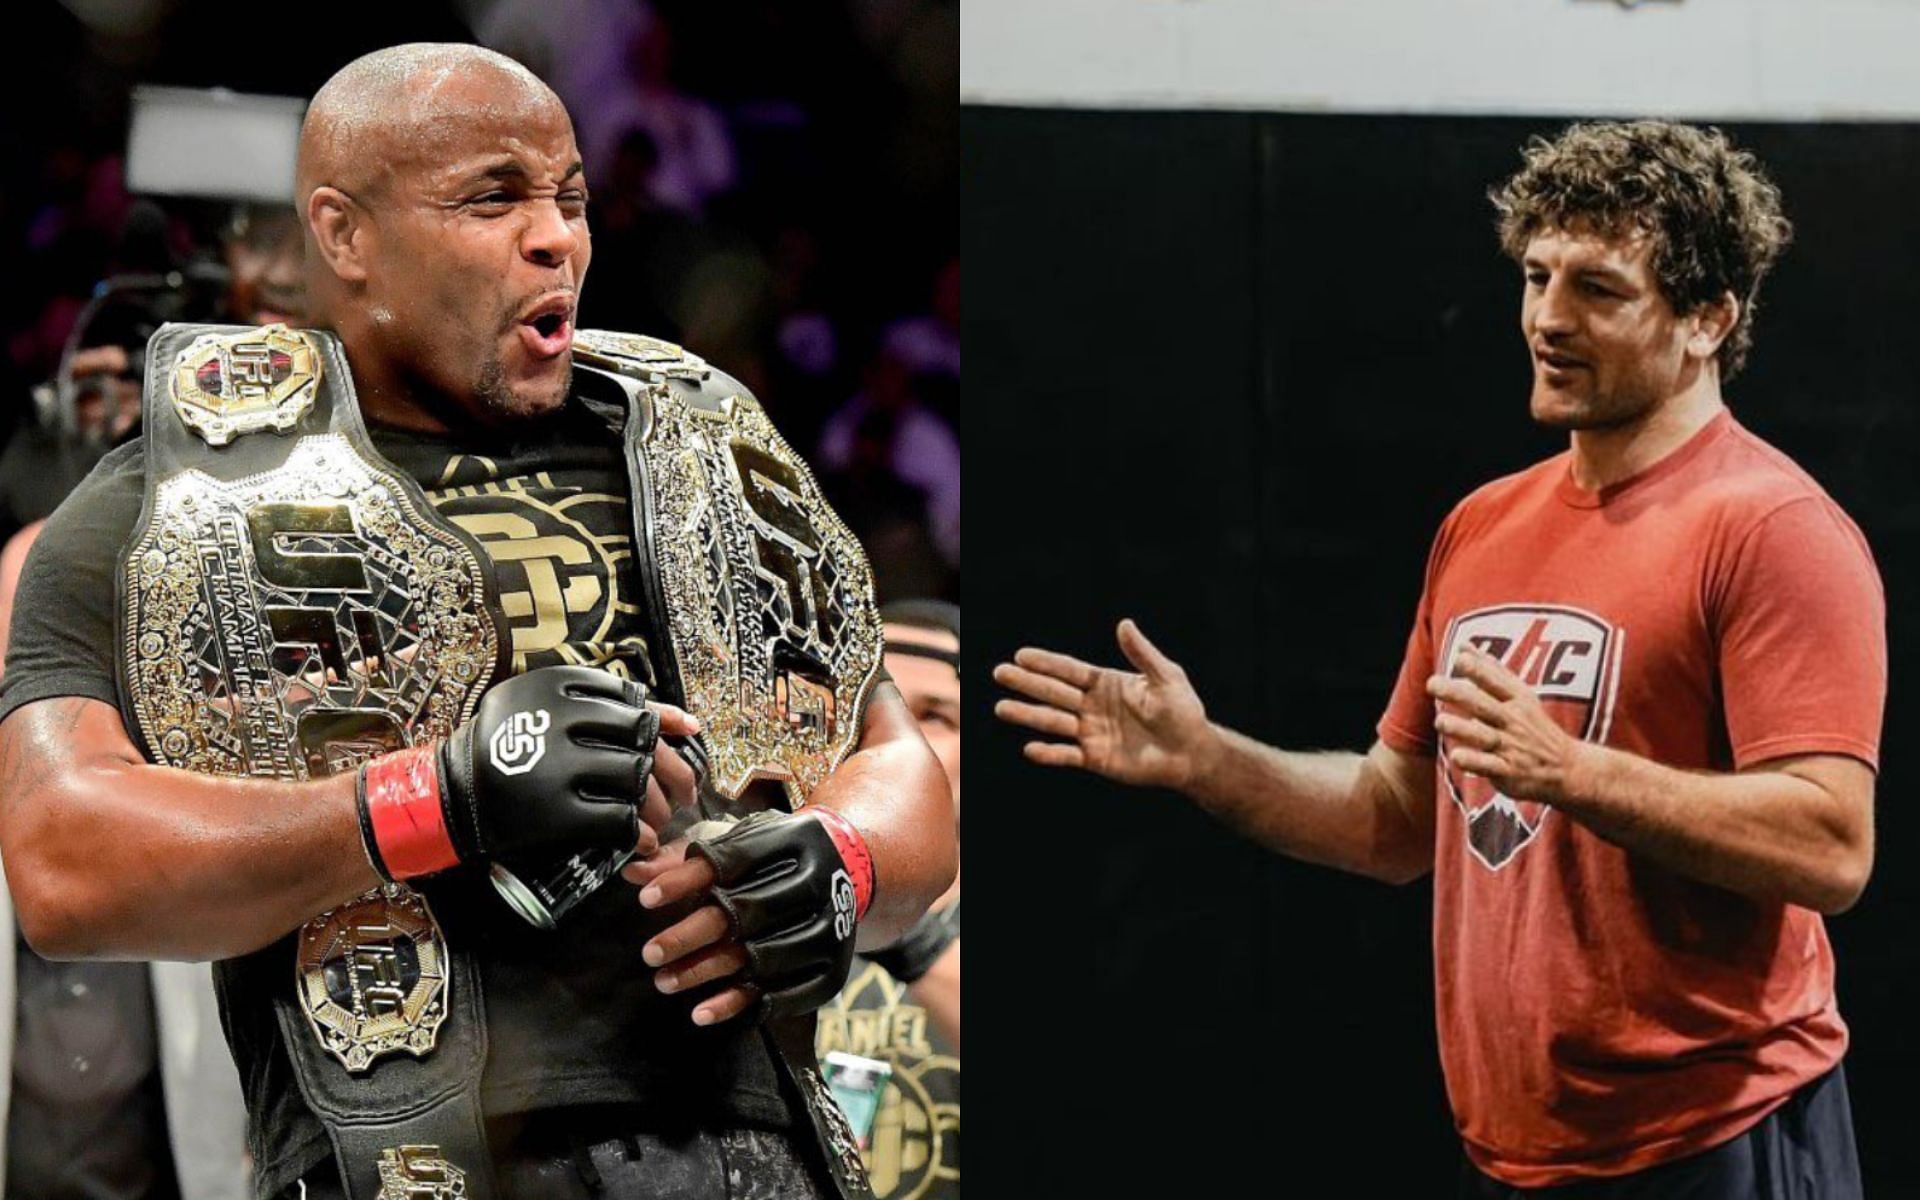 Daniel Cormier (left) and Ben Askren (right) discuss recently leaked video involving Tyron Woodley [Photo Courtesy @velutamma on X and @mizzouwrestling on Instagram]